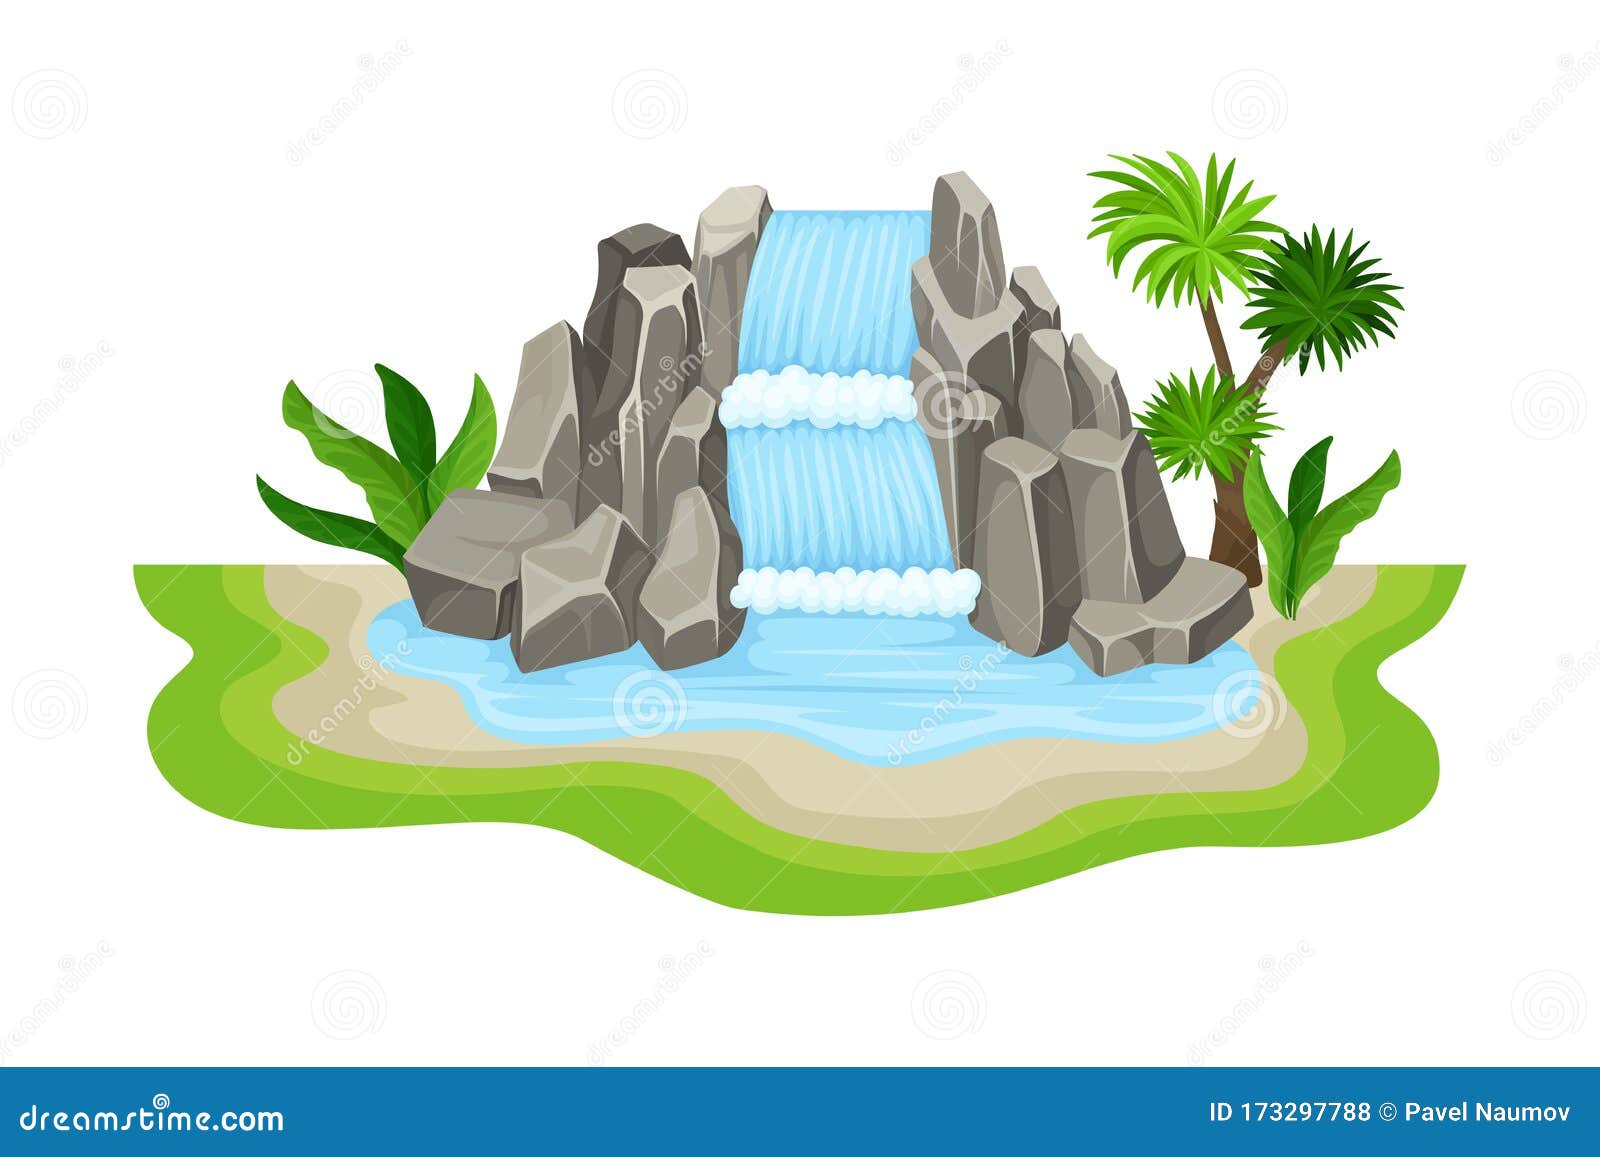 tropical waterfall with cliffy bounds and exotic plants growing around  